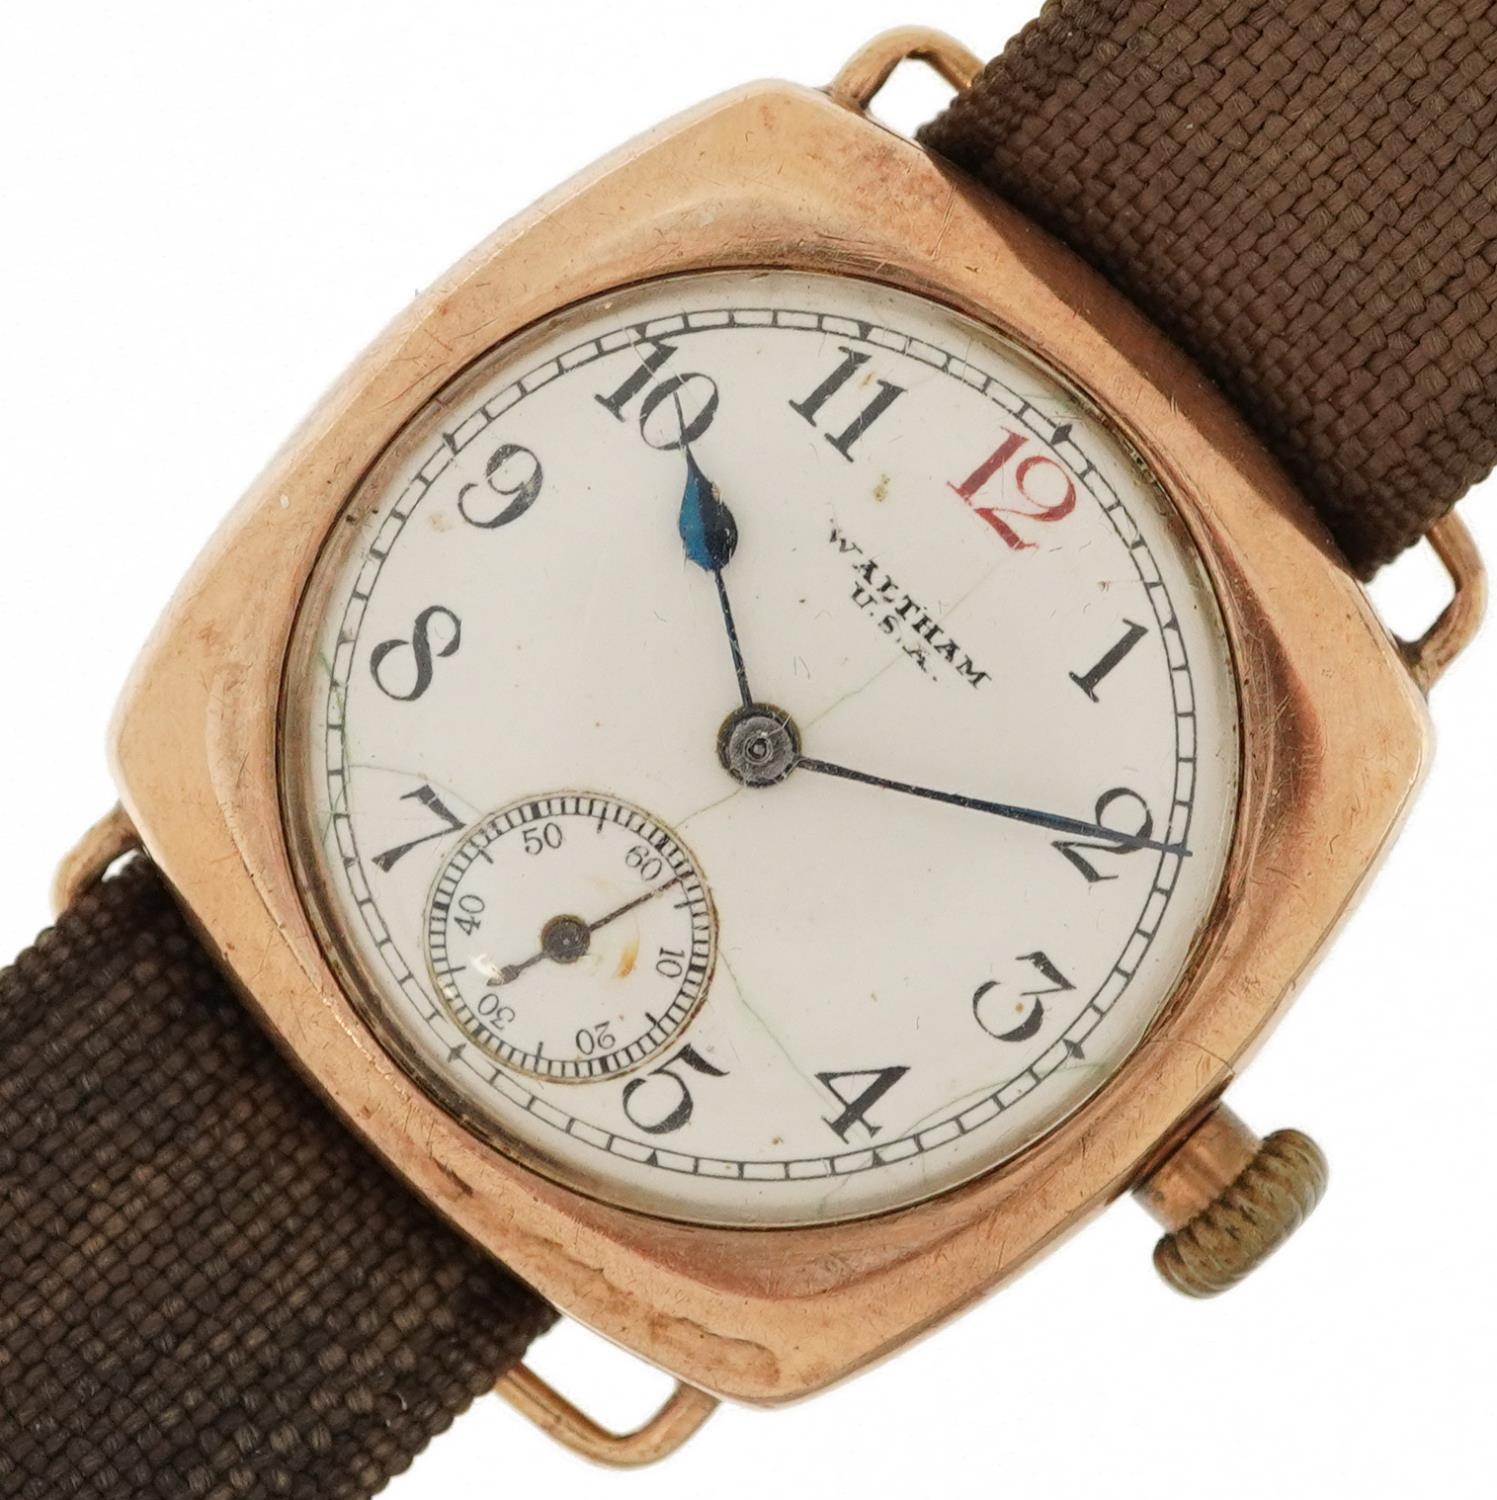 Waltham, gentlemen's 9ct gold manual wind wristwatch having enamelled and subsidiary dials with